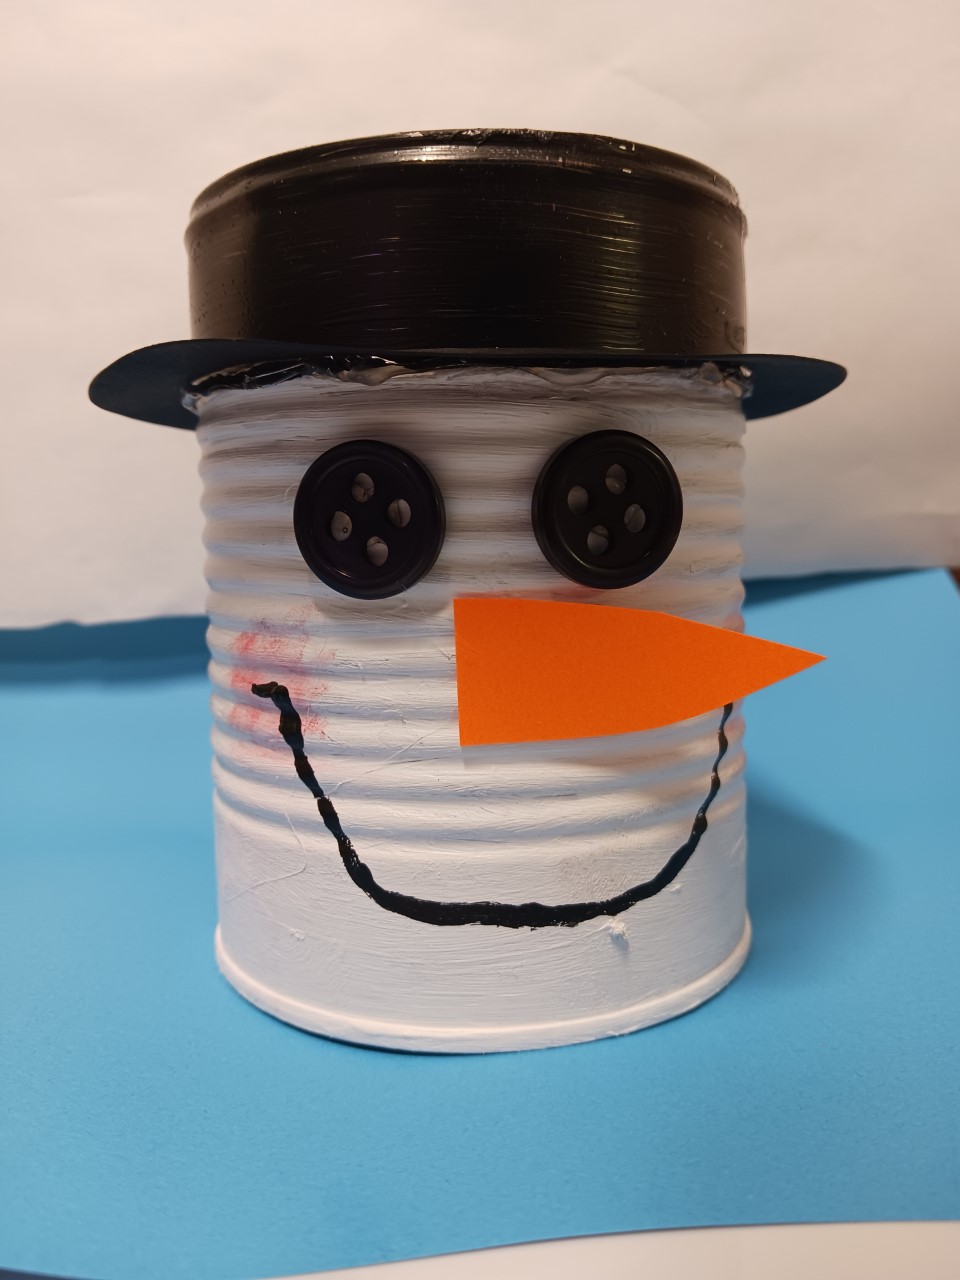 Join us in some winter fun making a snowman out of a tin can!